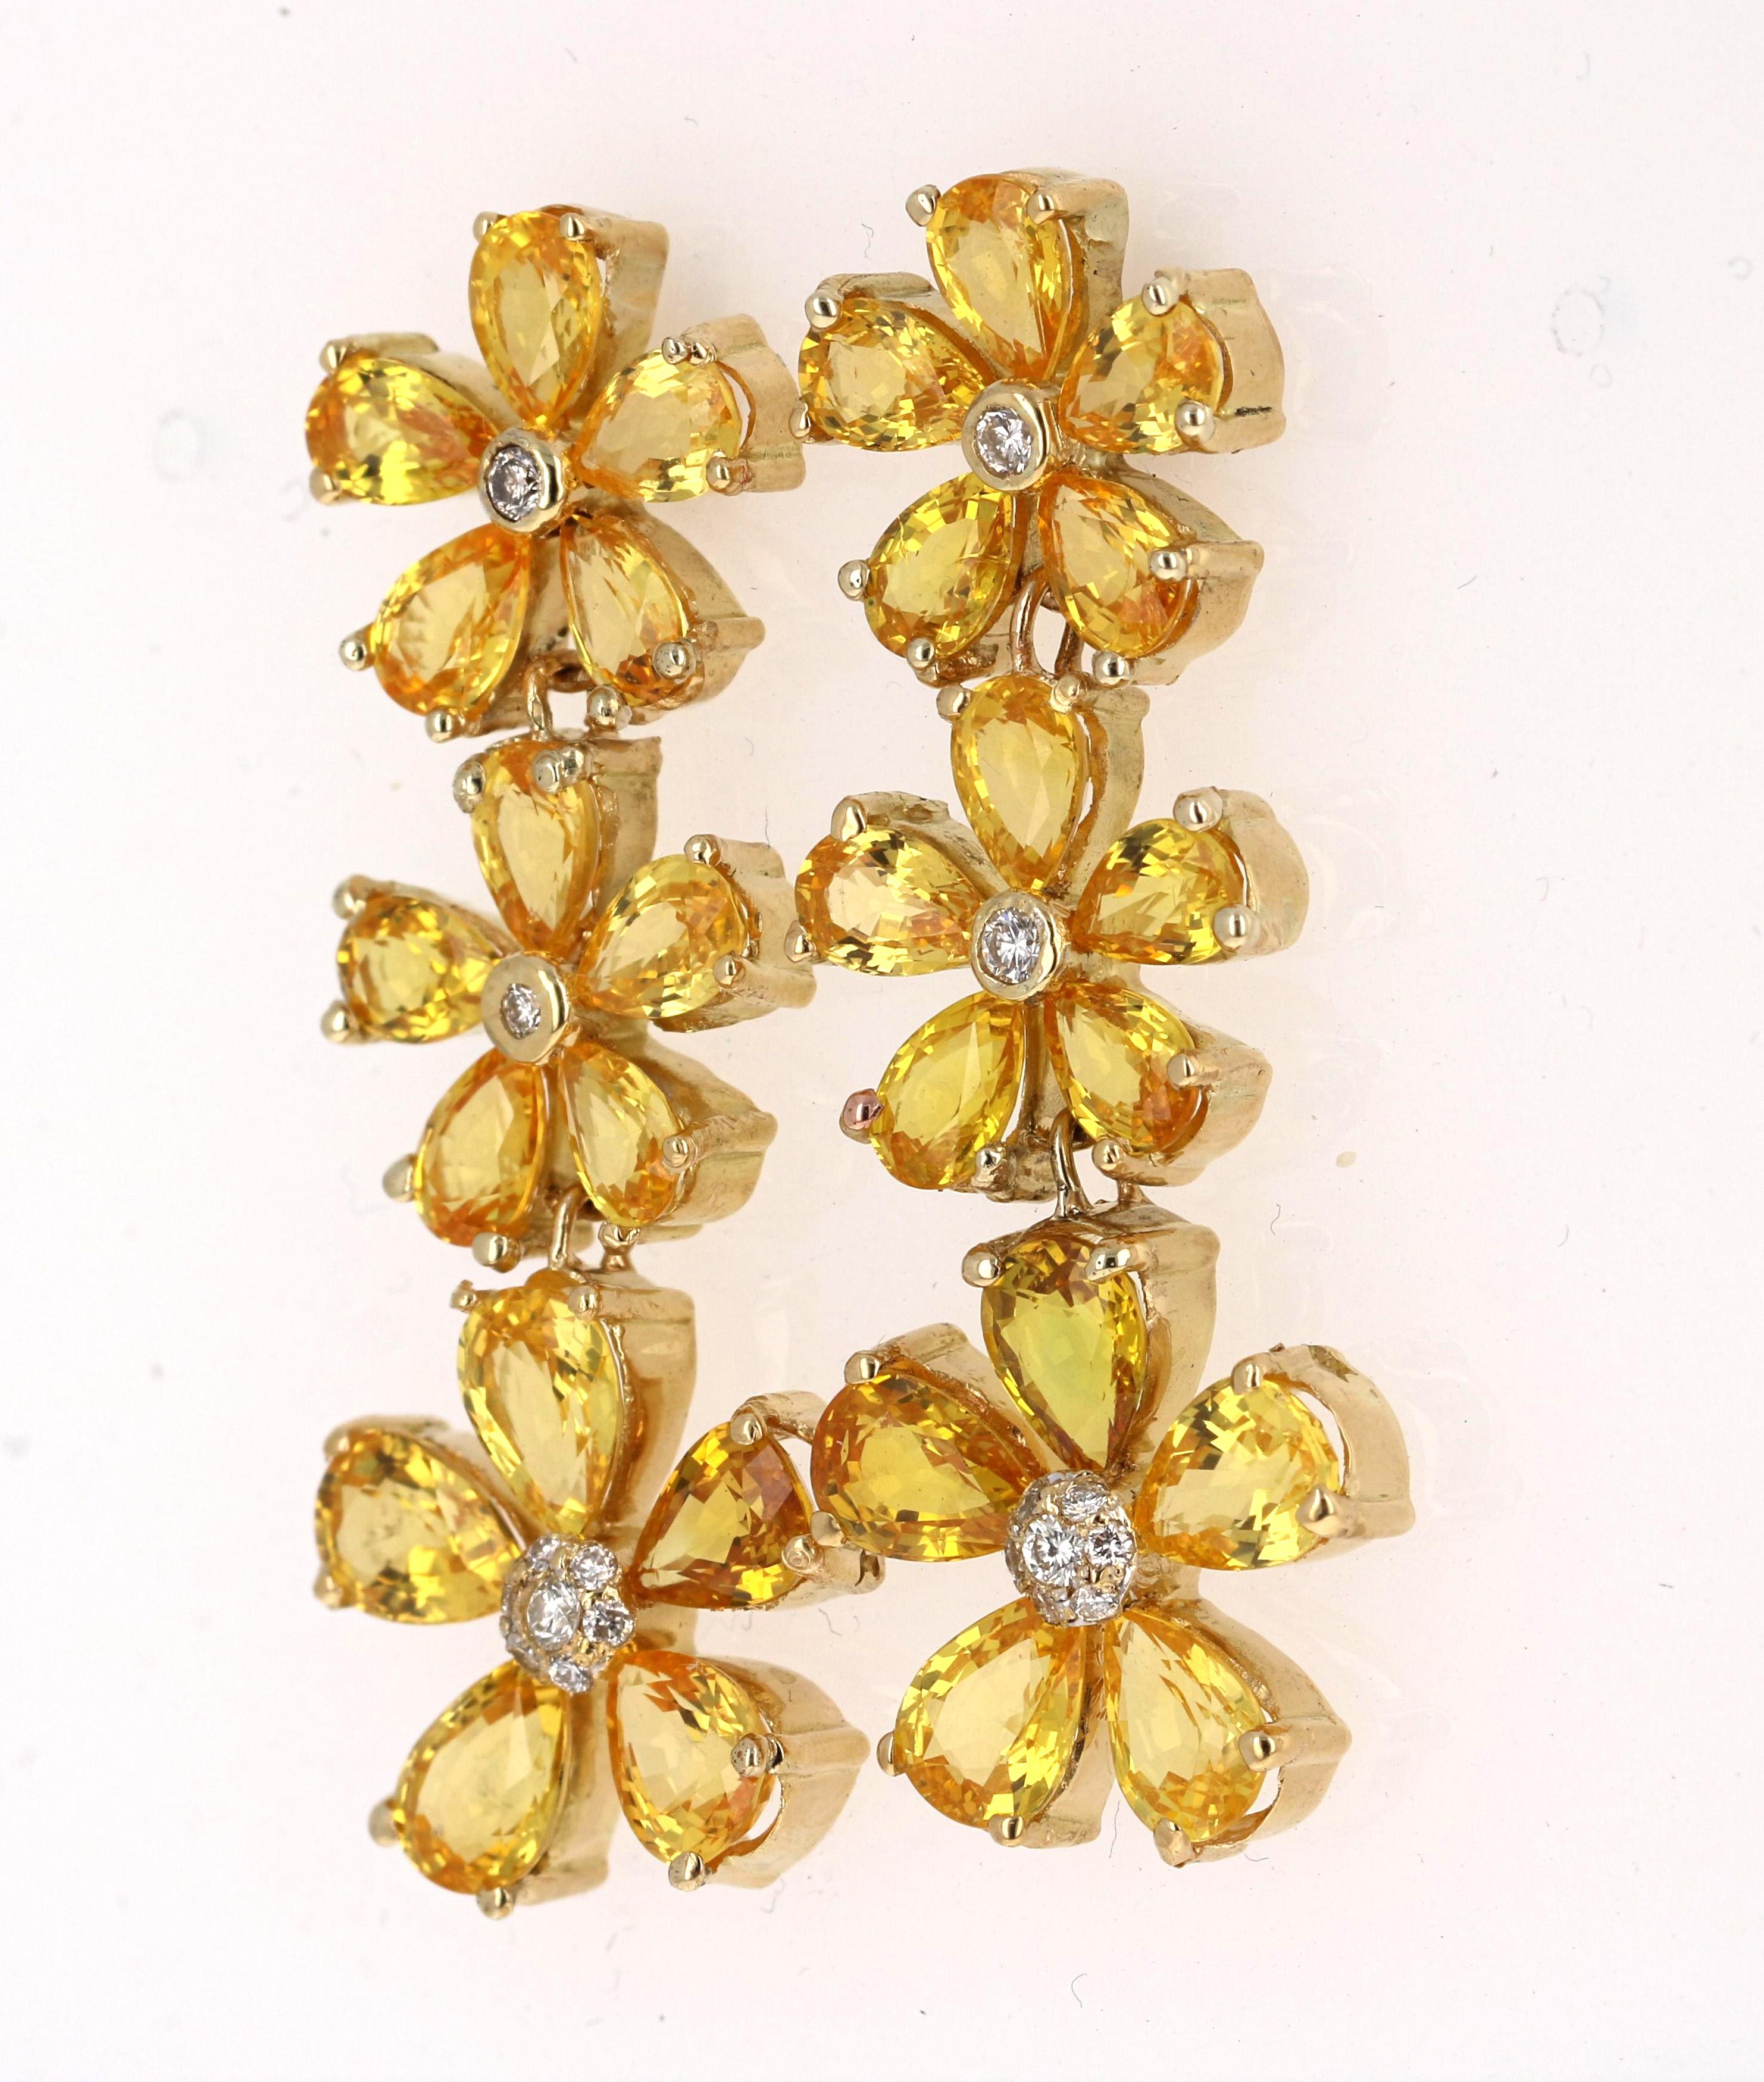 These one of a kind earrings have 30 Pear Cut Yellow Sapphires that weigh 19.60 Carats. It also has 18 Round Cut Diamonds that weigh 0.30 Carats. Clarity: VS and Color: H. The total carat weight of the ring is 19.90 Carats. 
The Yellow Sapphires are